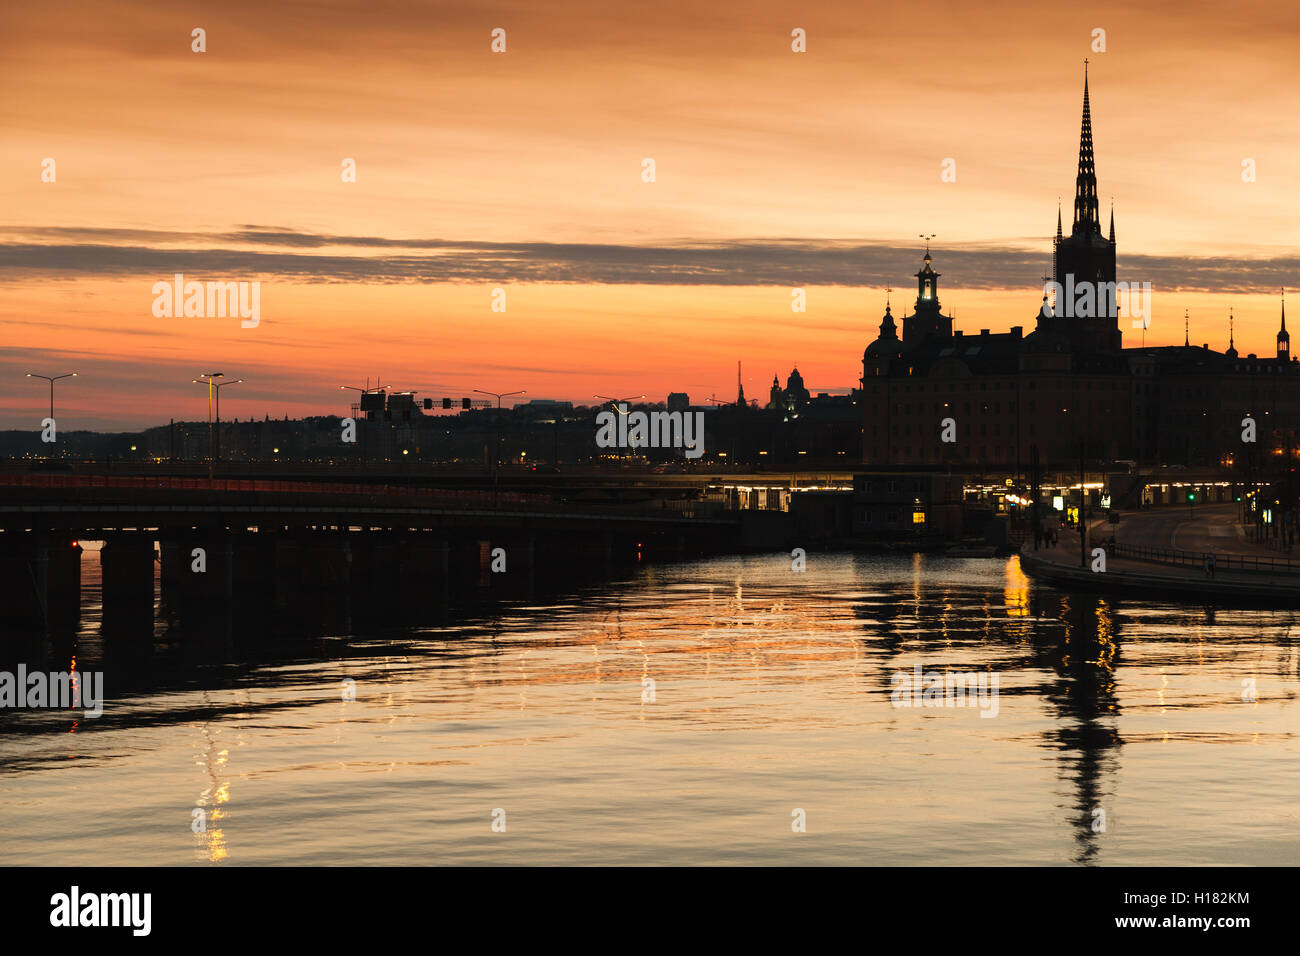 Silhouette cityscape of Gamla Stan city district in central Stockholm ...